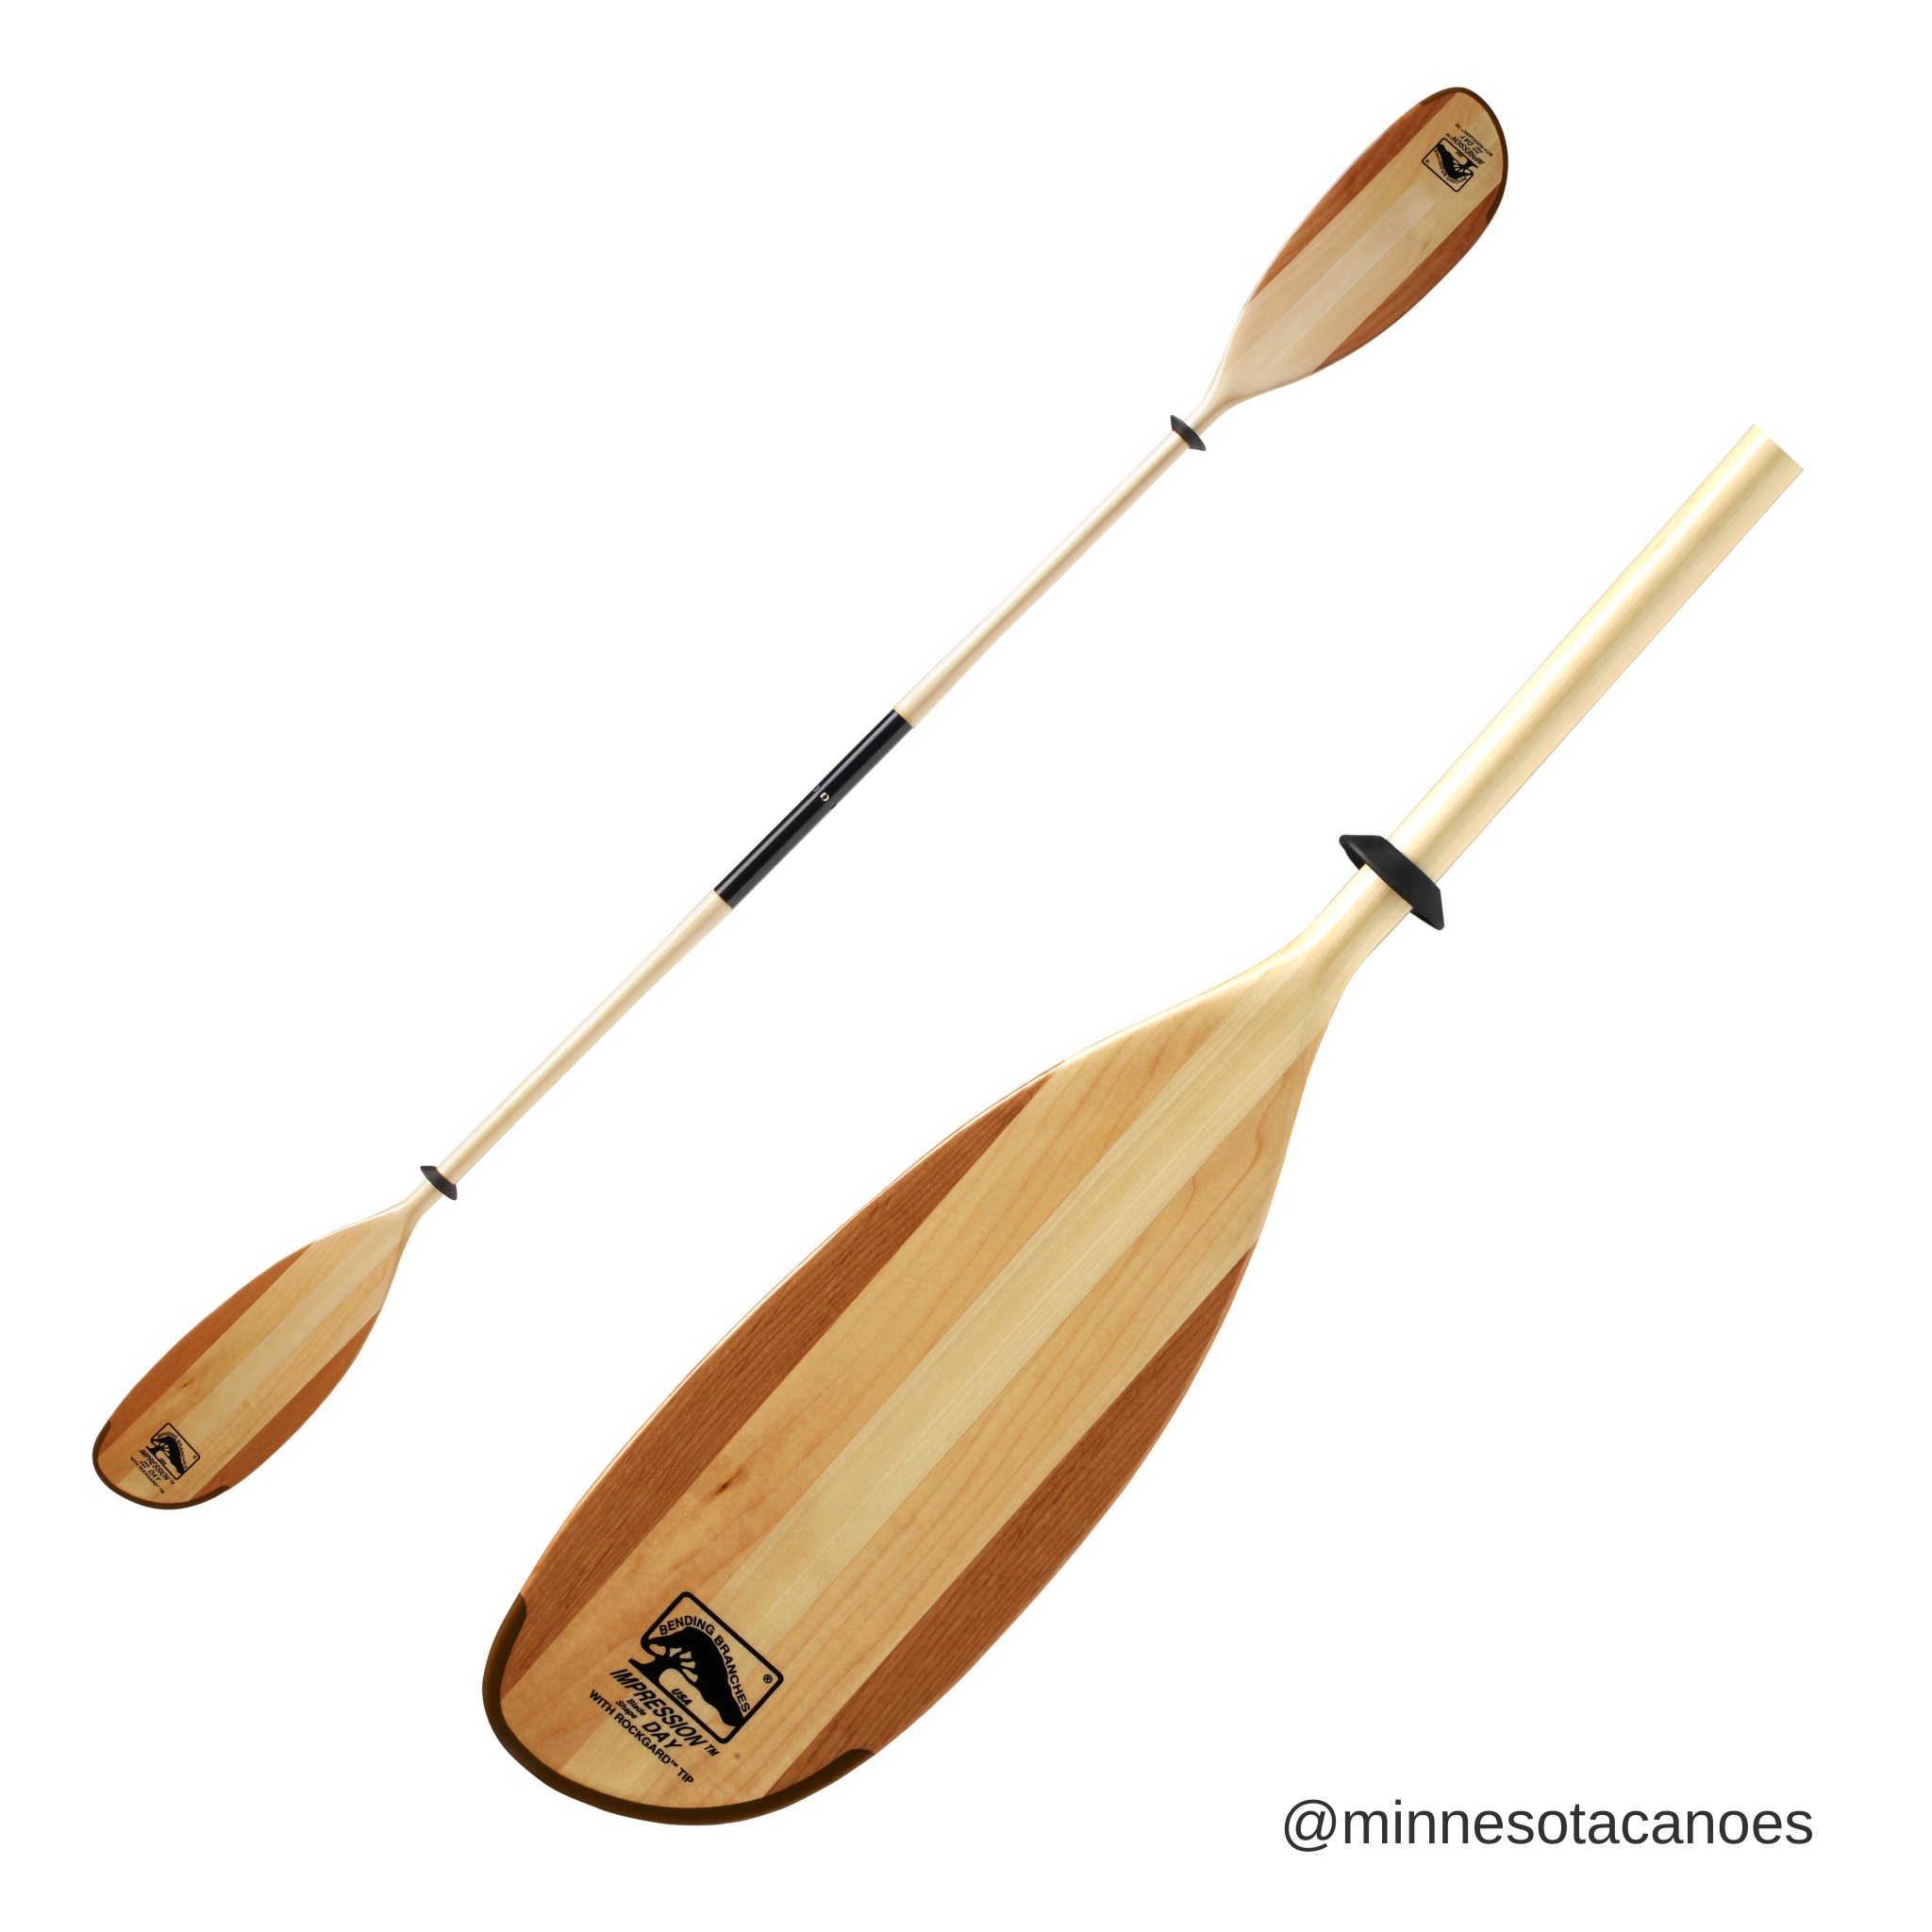 Entering the World of Wood: A Review of Shade Tree's Custom Bent Shaft  Kayak Paddle - Paddling Life